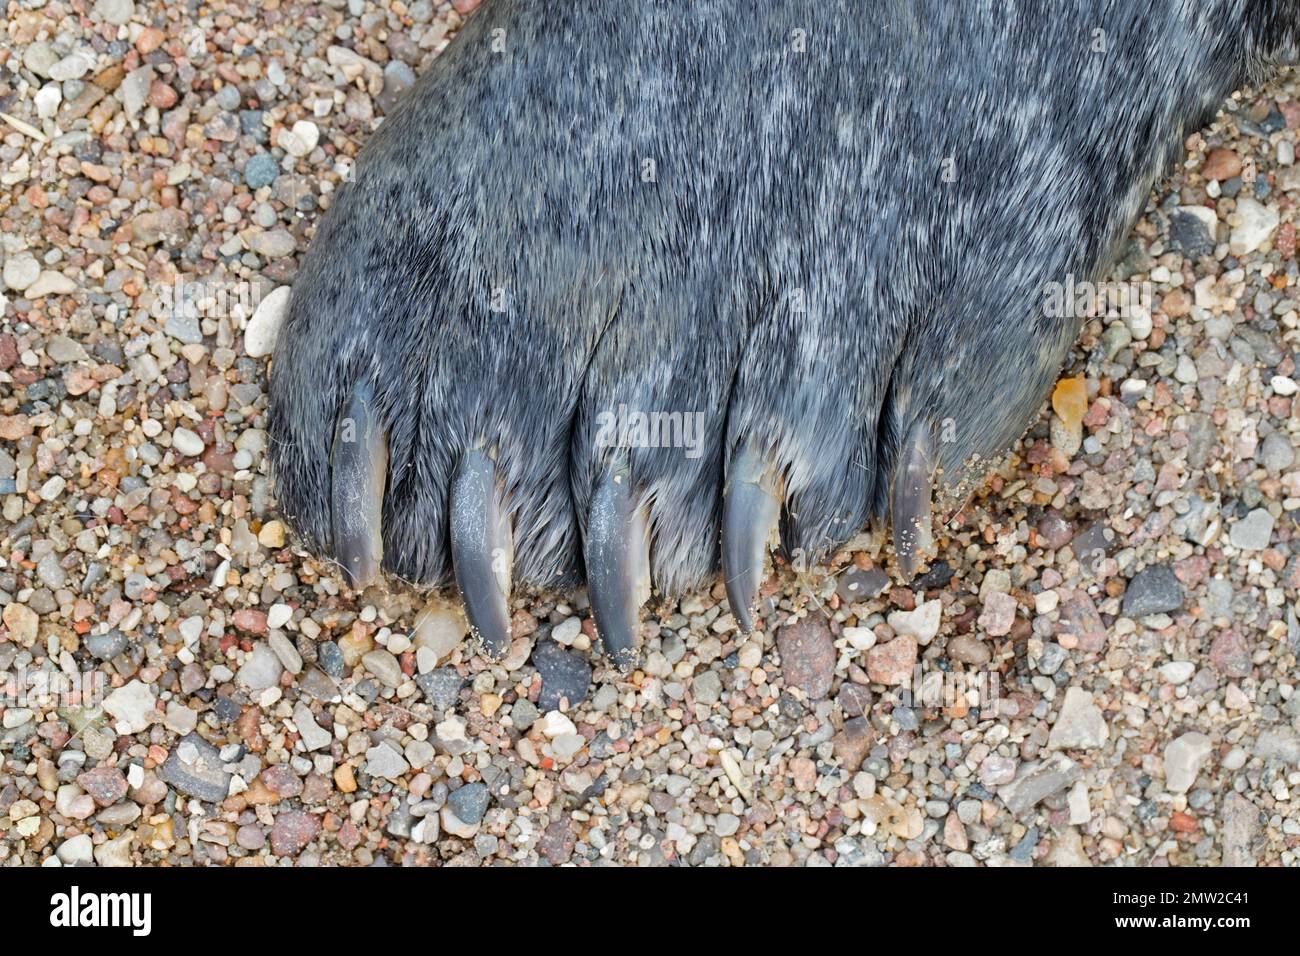 Common seal / harbour seal / harbor seal (Phoca vitulina) close-up of fore flipper showing claws Stock Photo